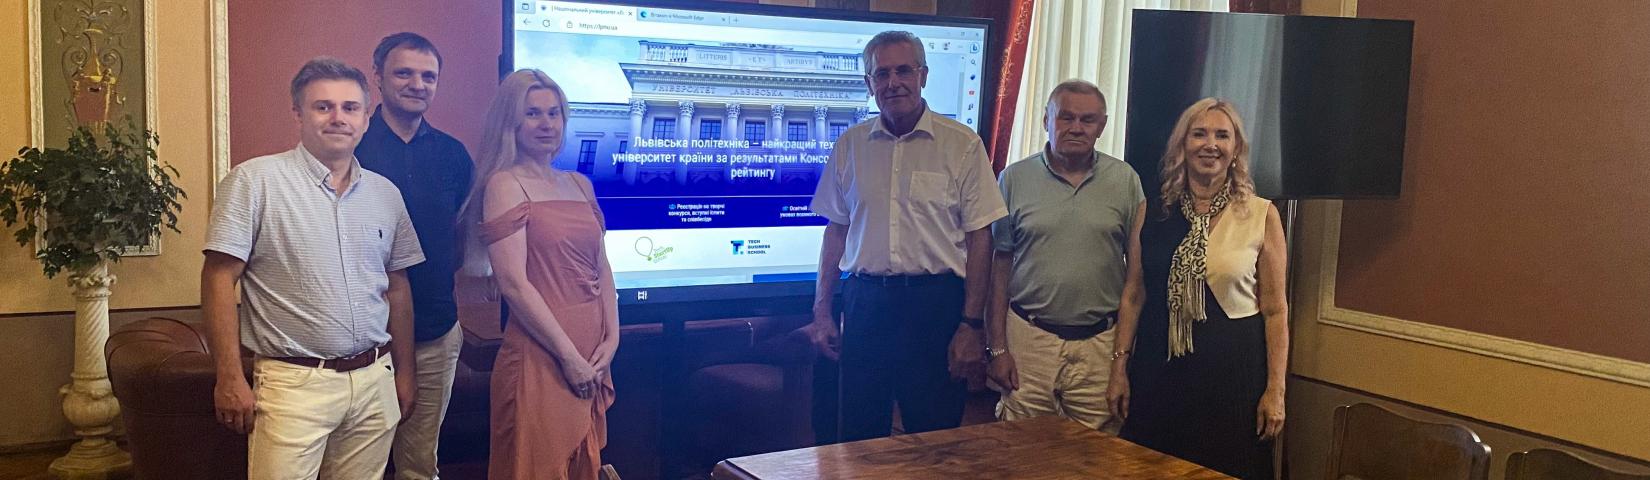 Lviv Polytechnic Project Team Presented the Main Goals and Current Results of the AFID Project to the University Management